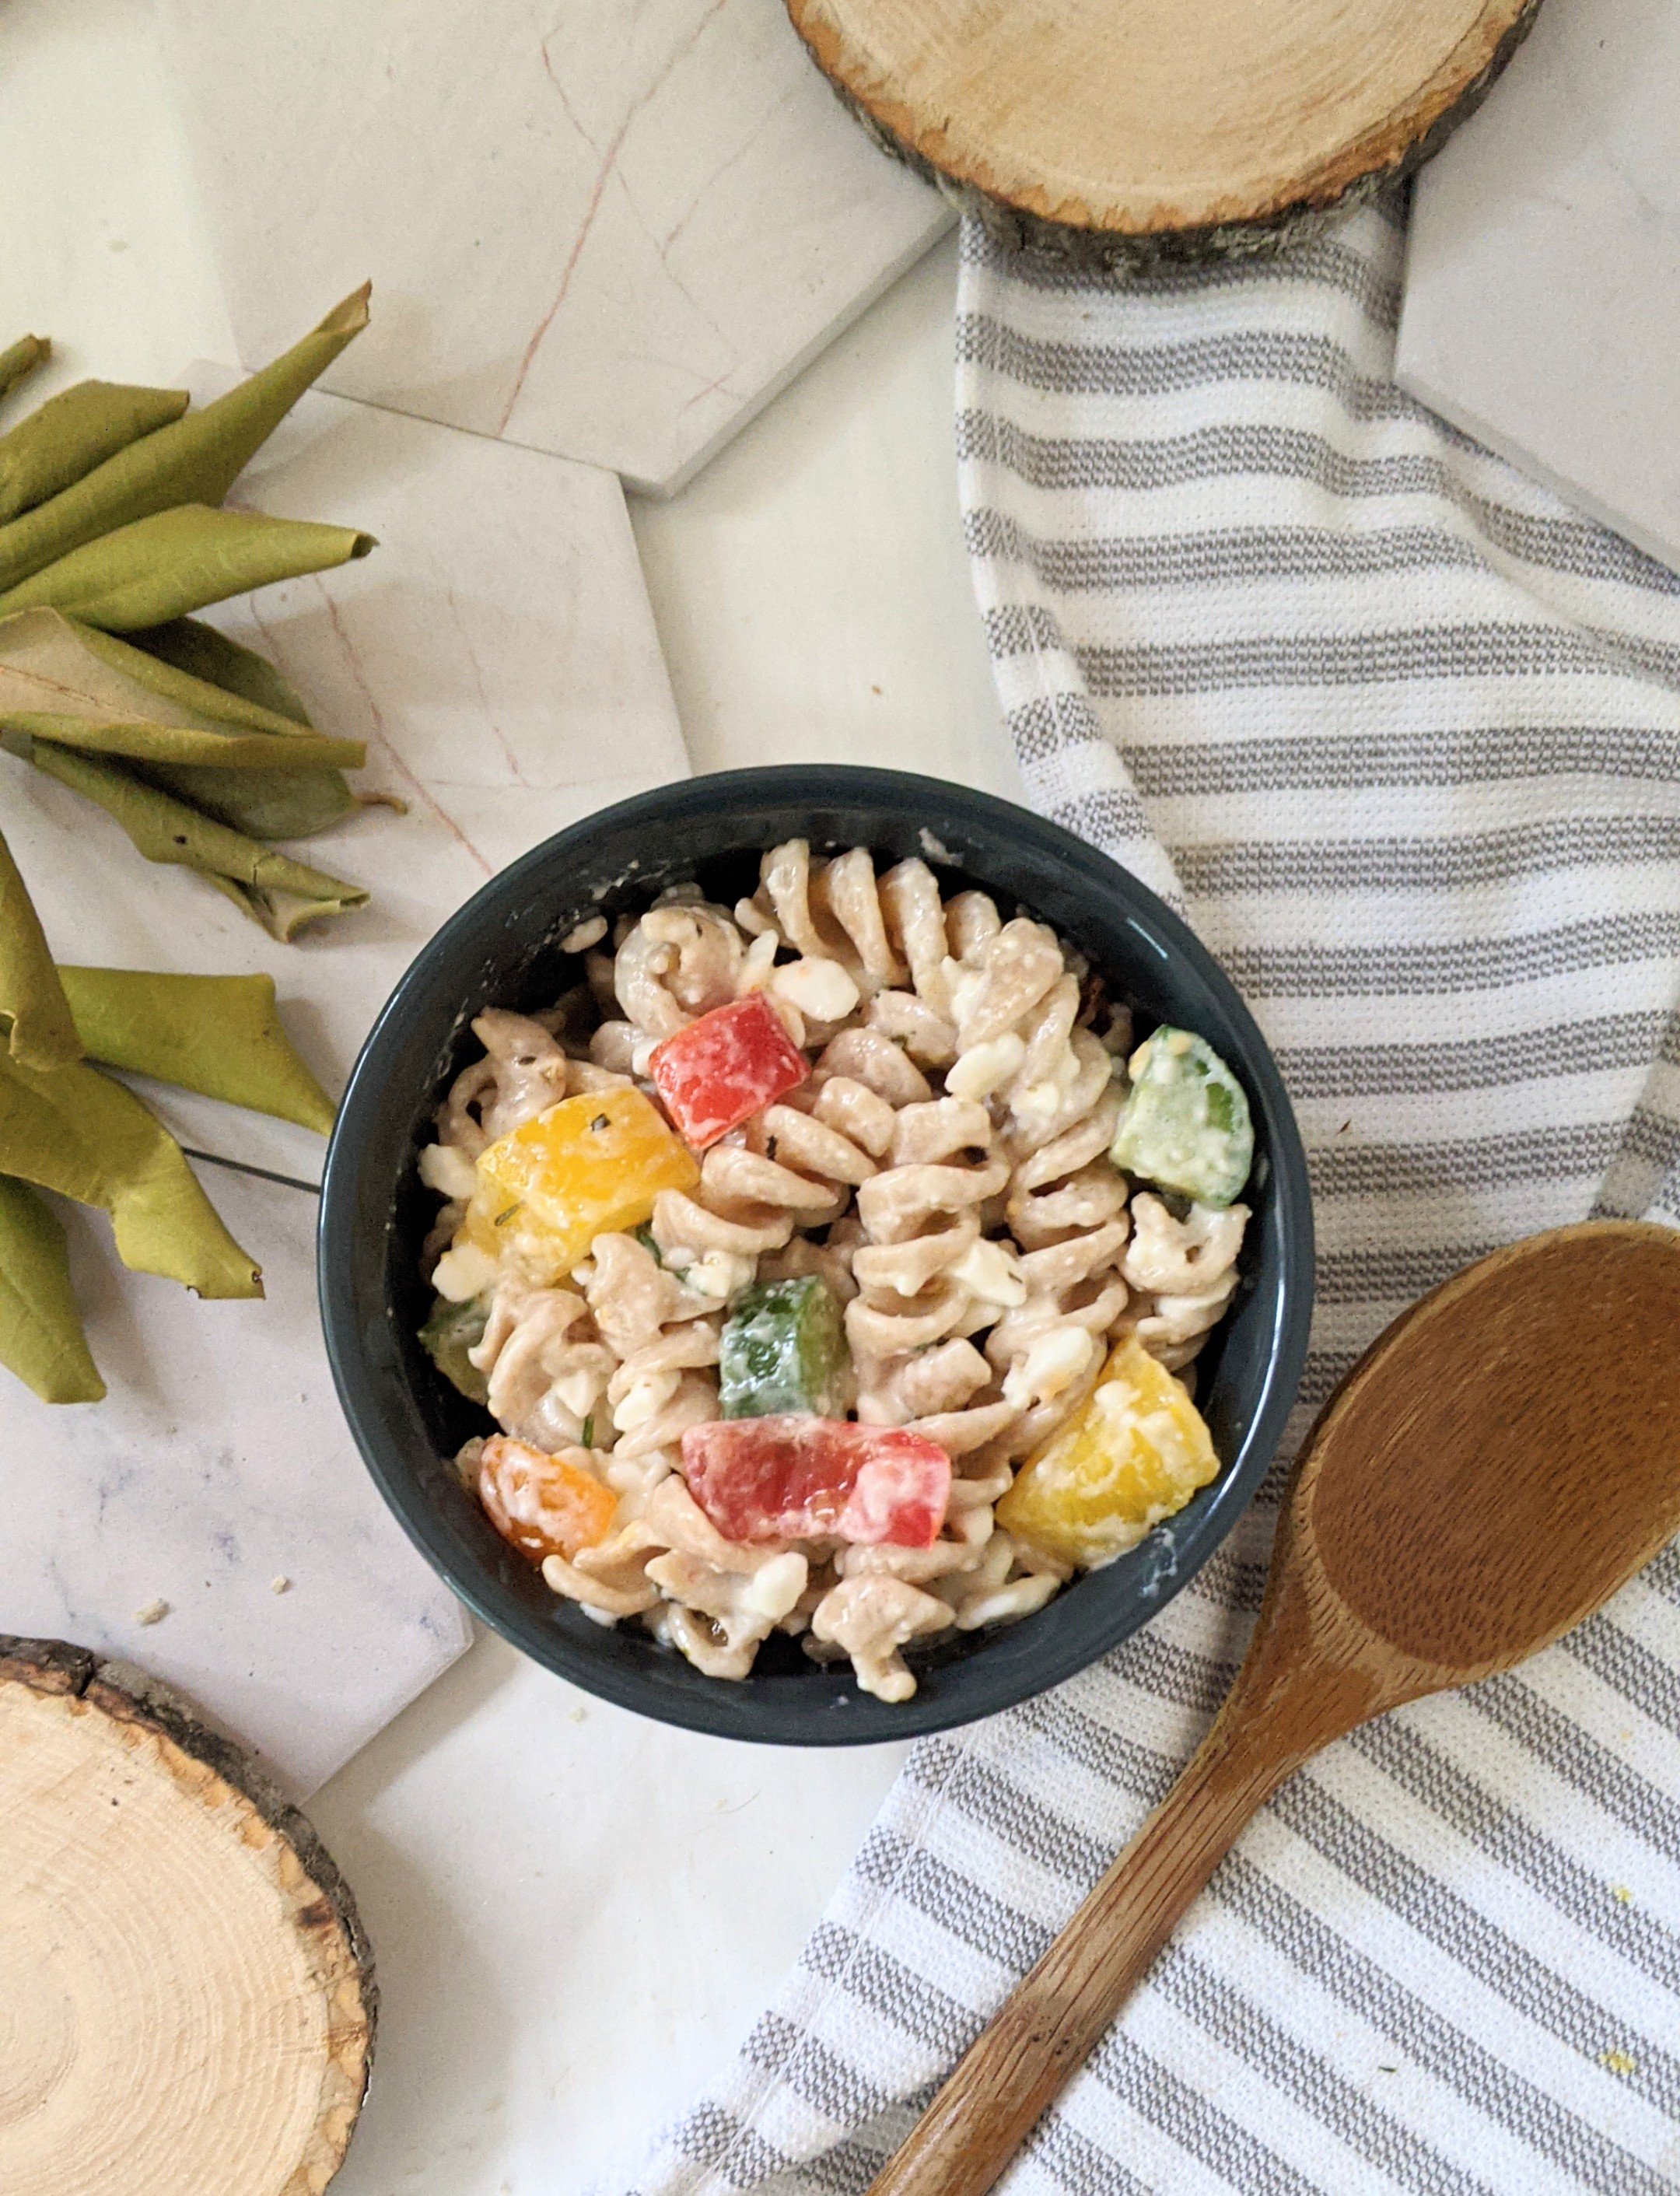 vegetarian creamy pasta salad without mayo recipe gluten free pasta salads for summer side dishes no mayo with high protein pasta and cottage cheese recipes